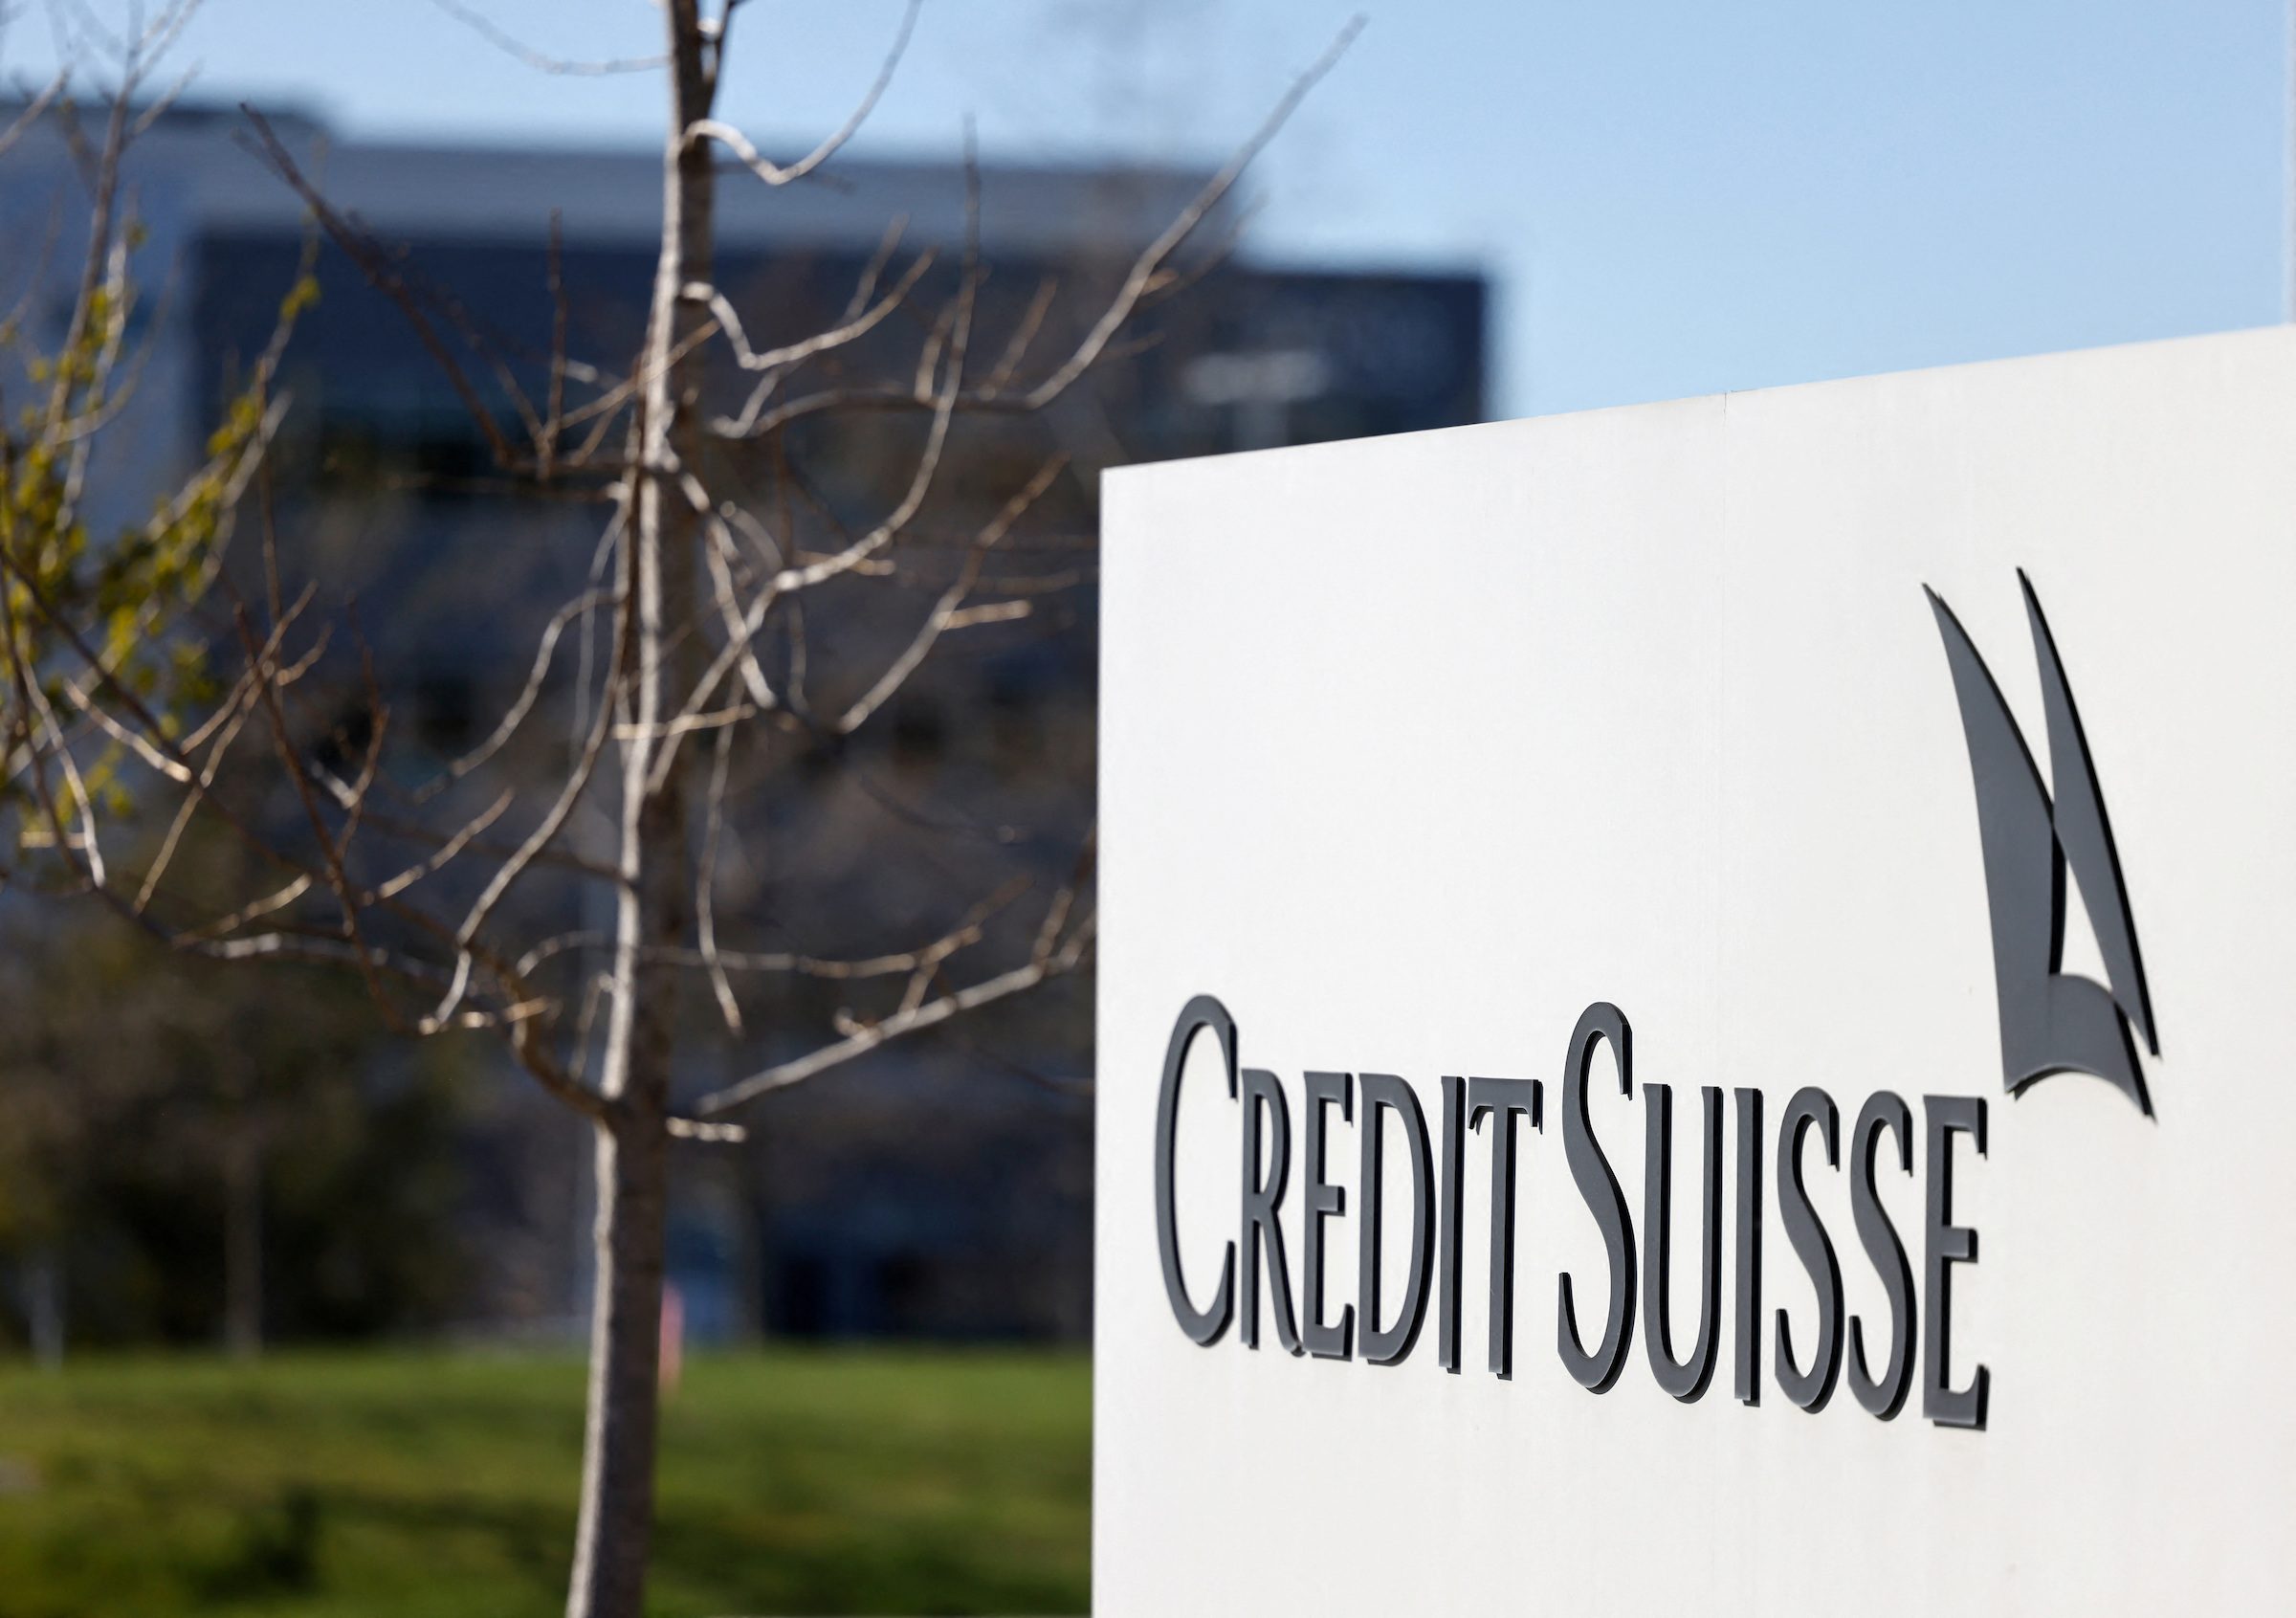 Swiss central bank throws financial lifeline to Credit Suisse after shares pummeled